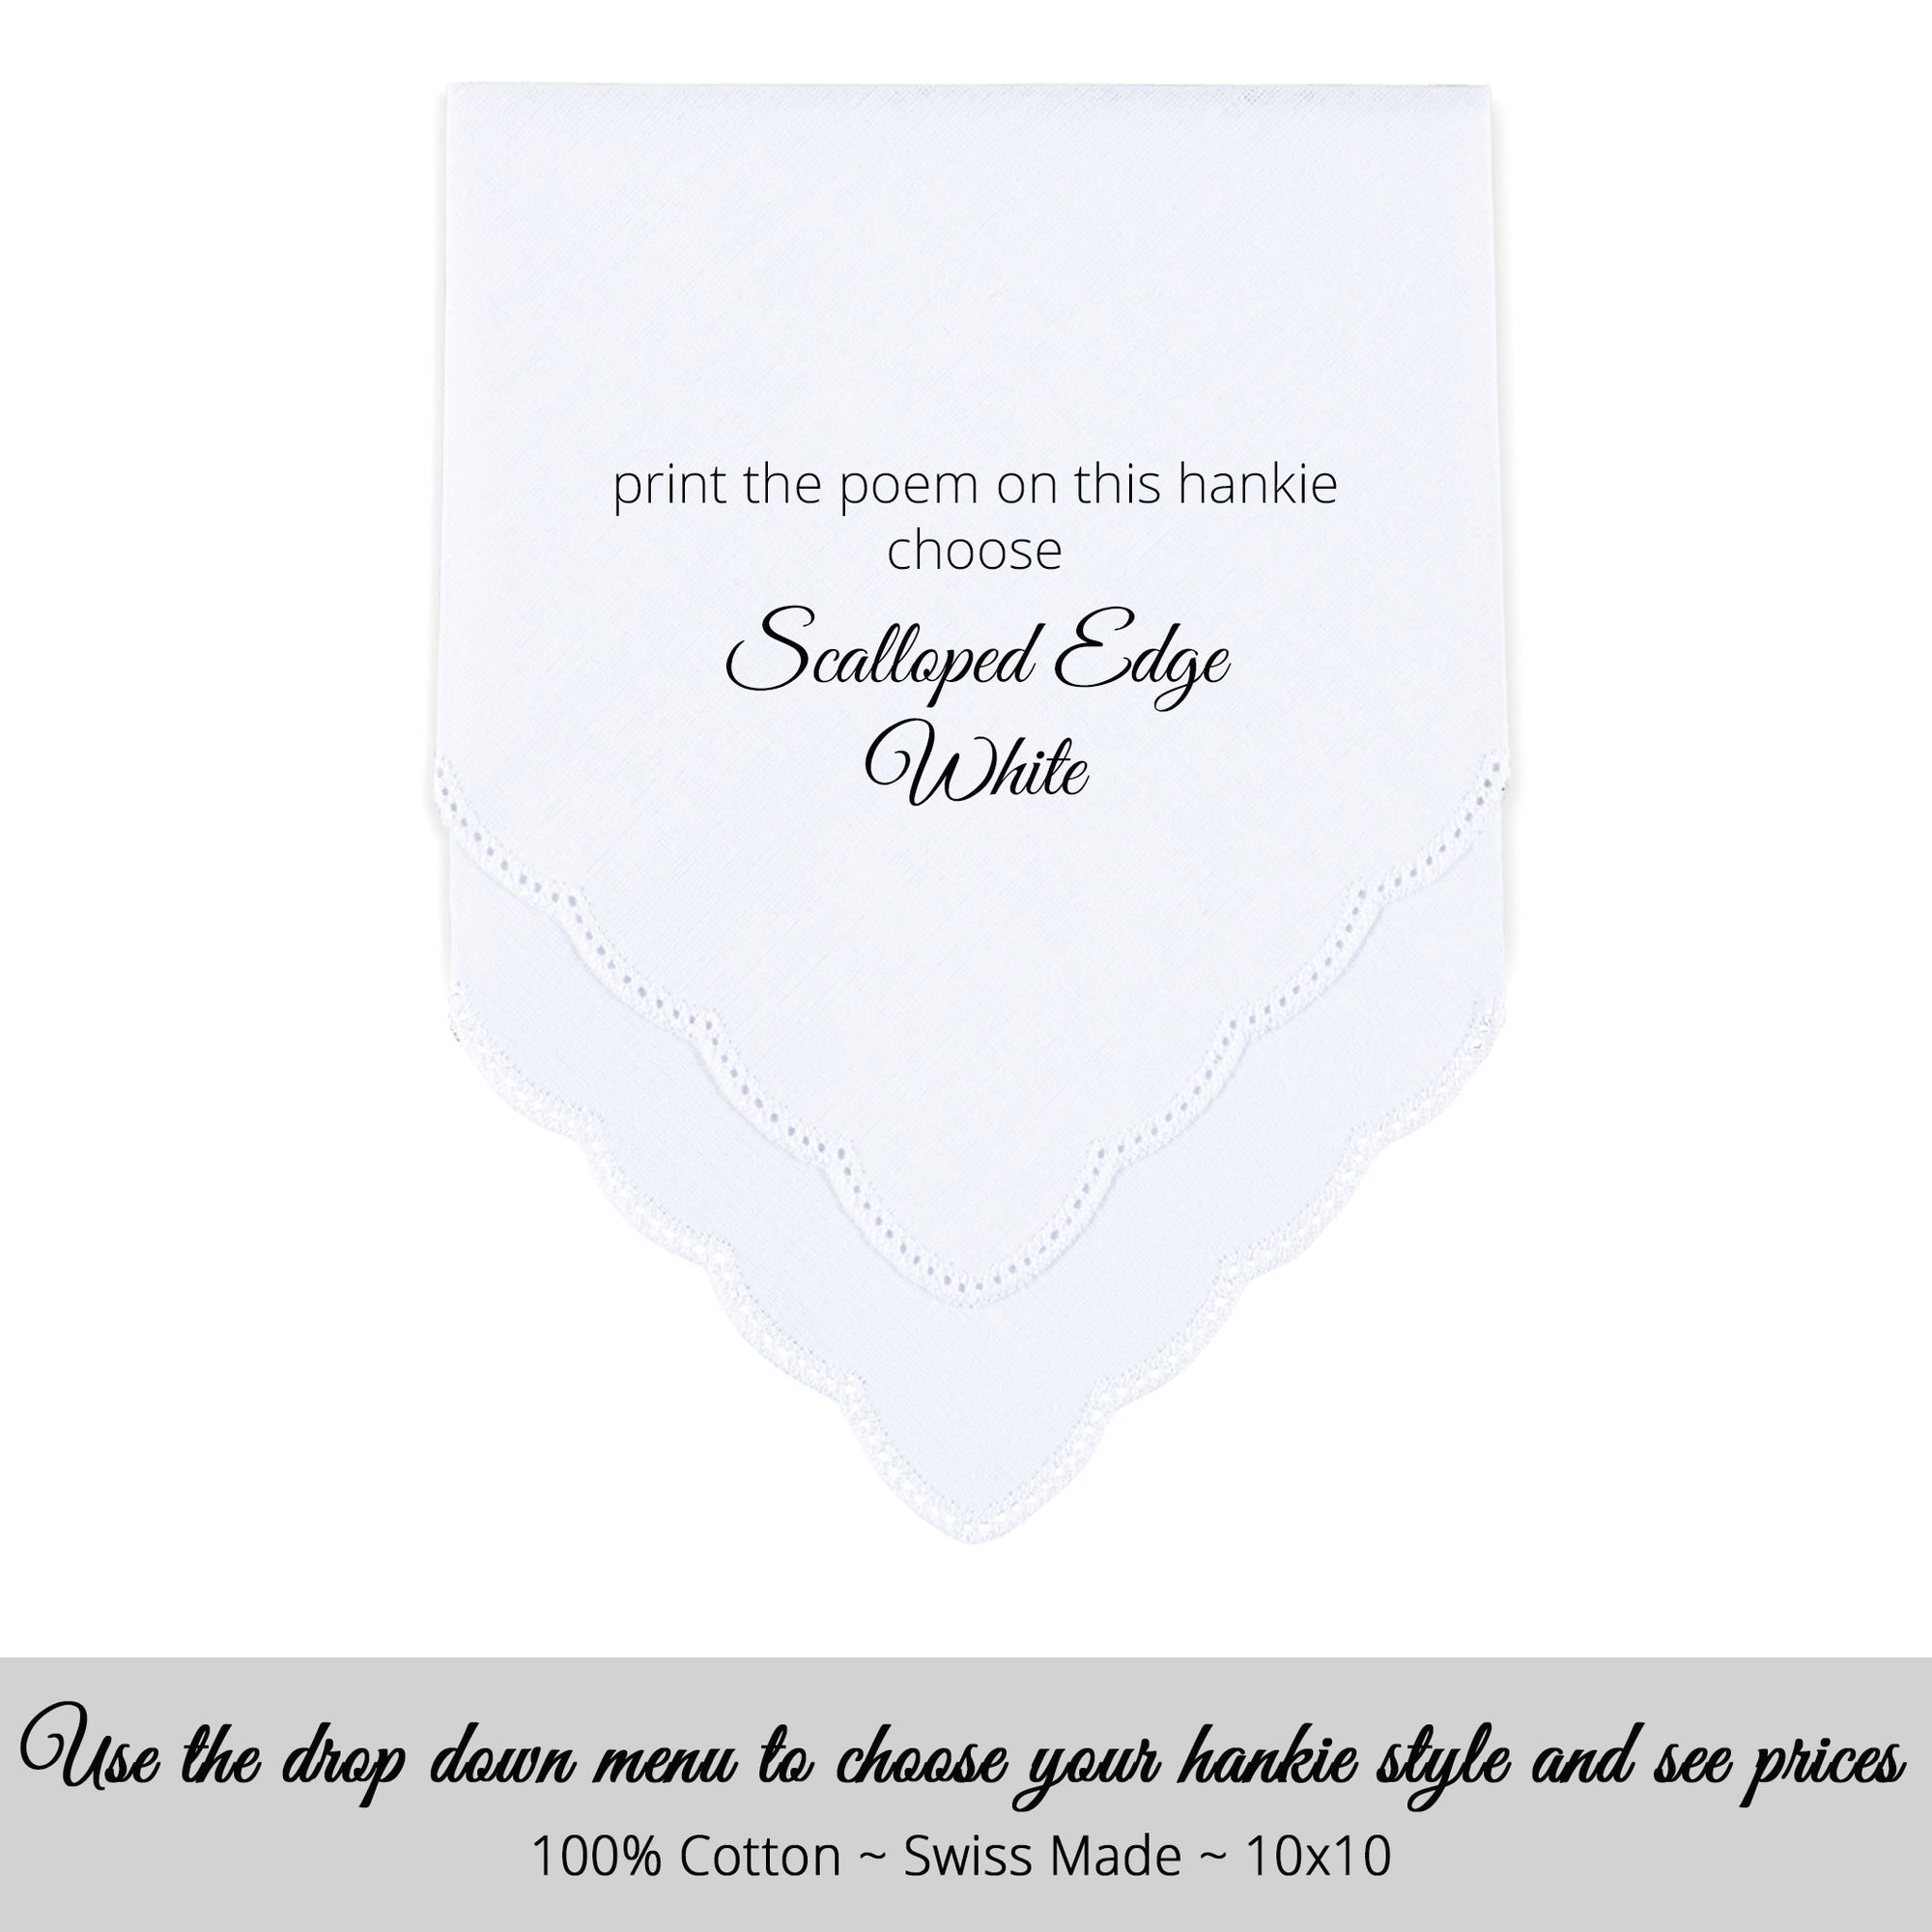 Wedding Handkerchief Scalloped edge white personalized poem for the sister of the bride maid of honor